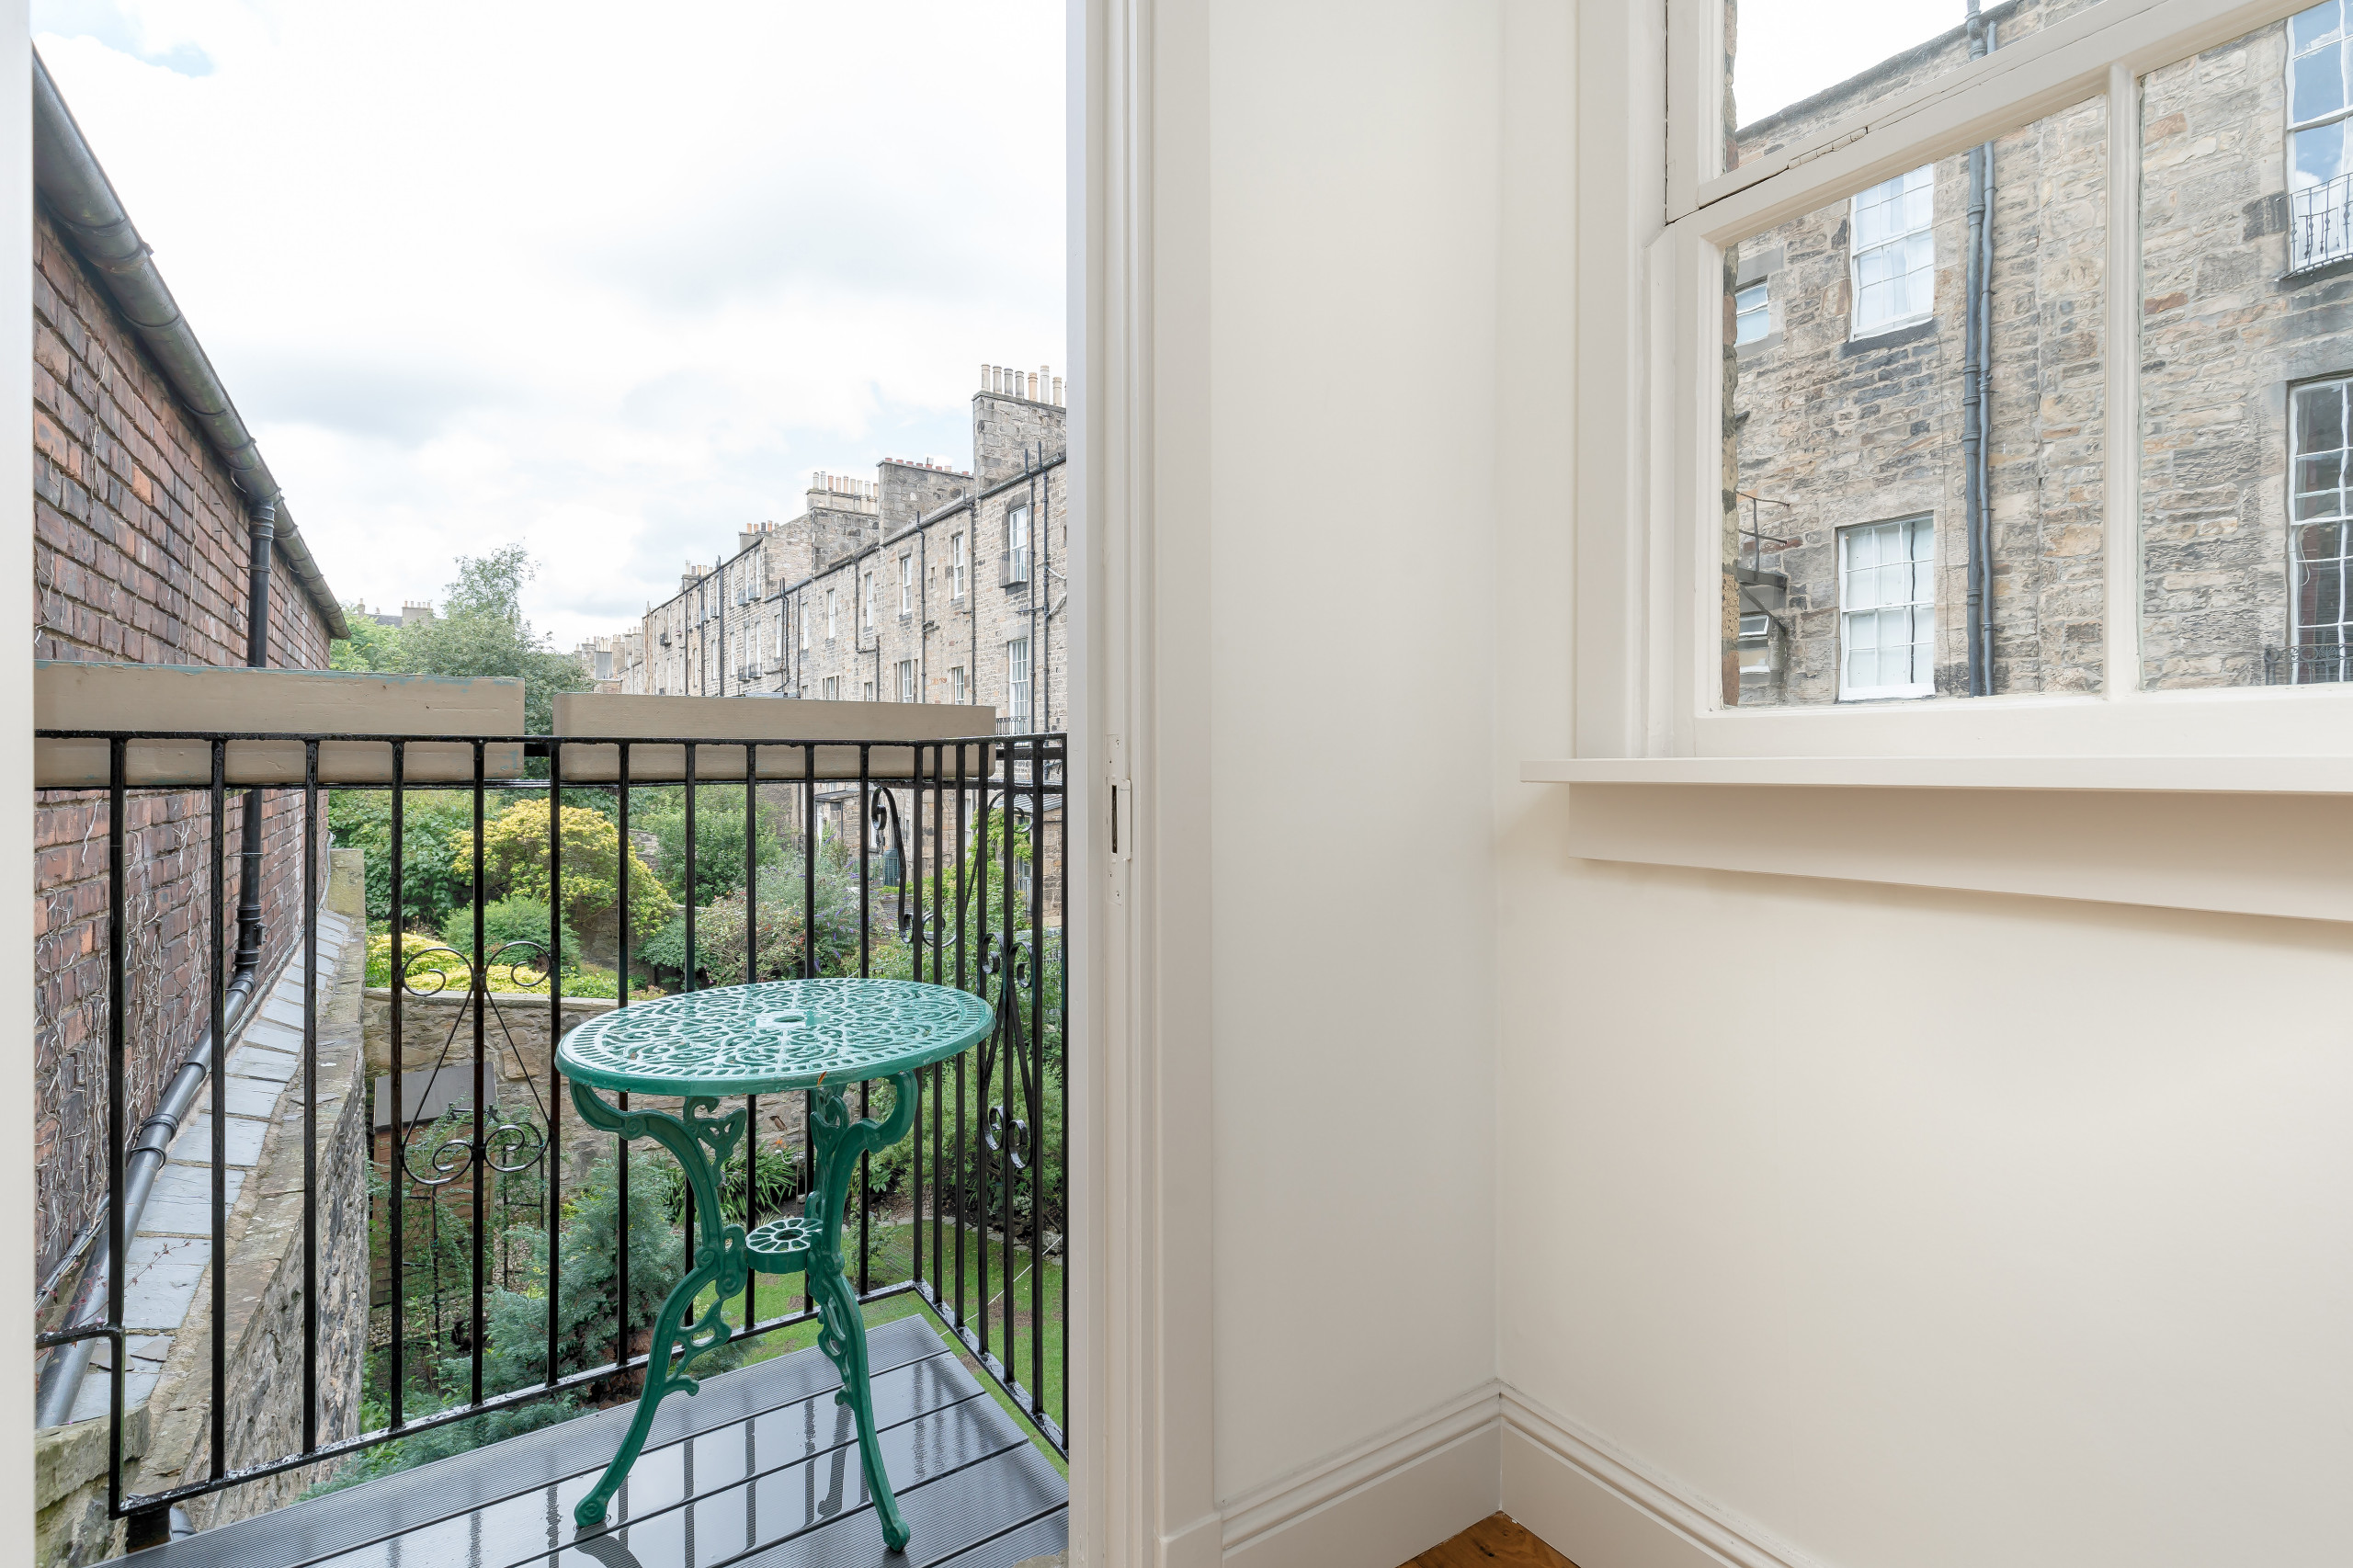 Alterations to a Main Door B-listed Apartment in Edinburgh New Town